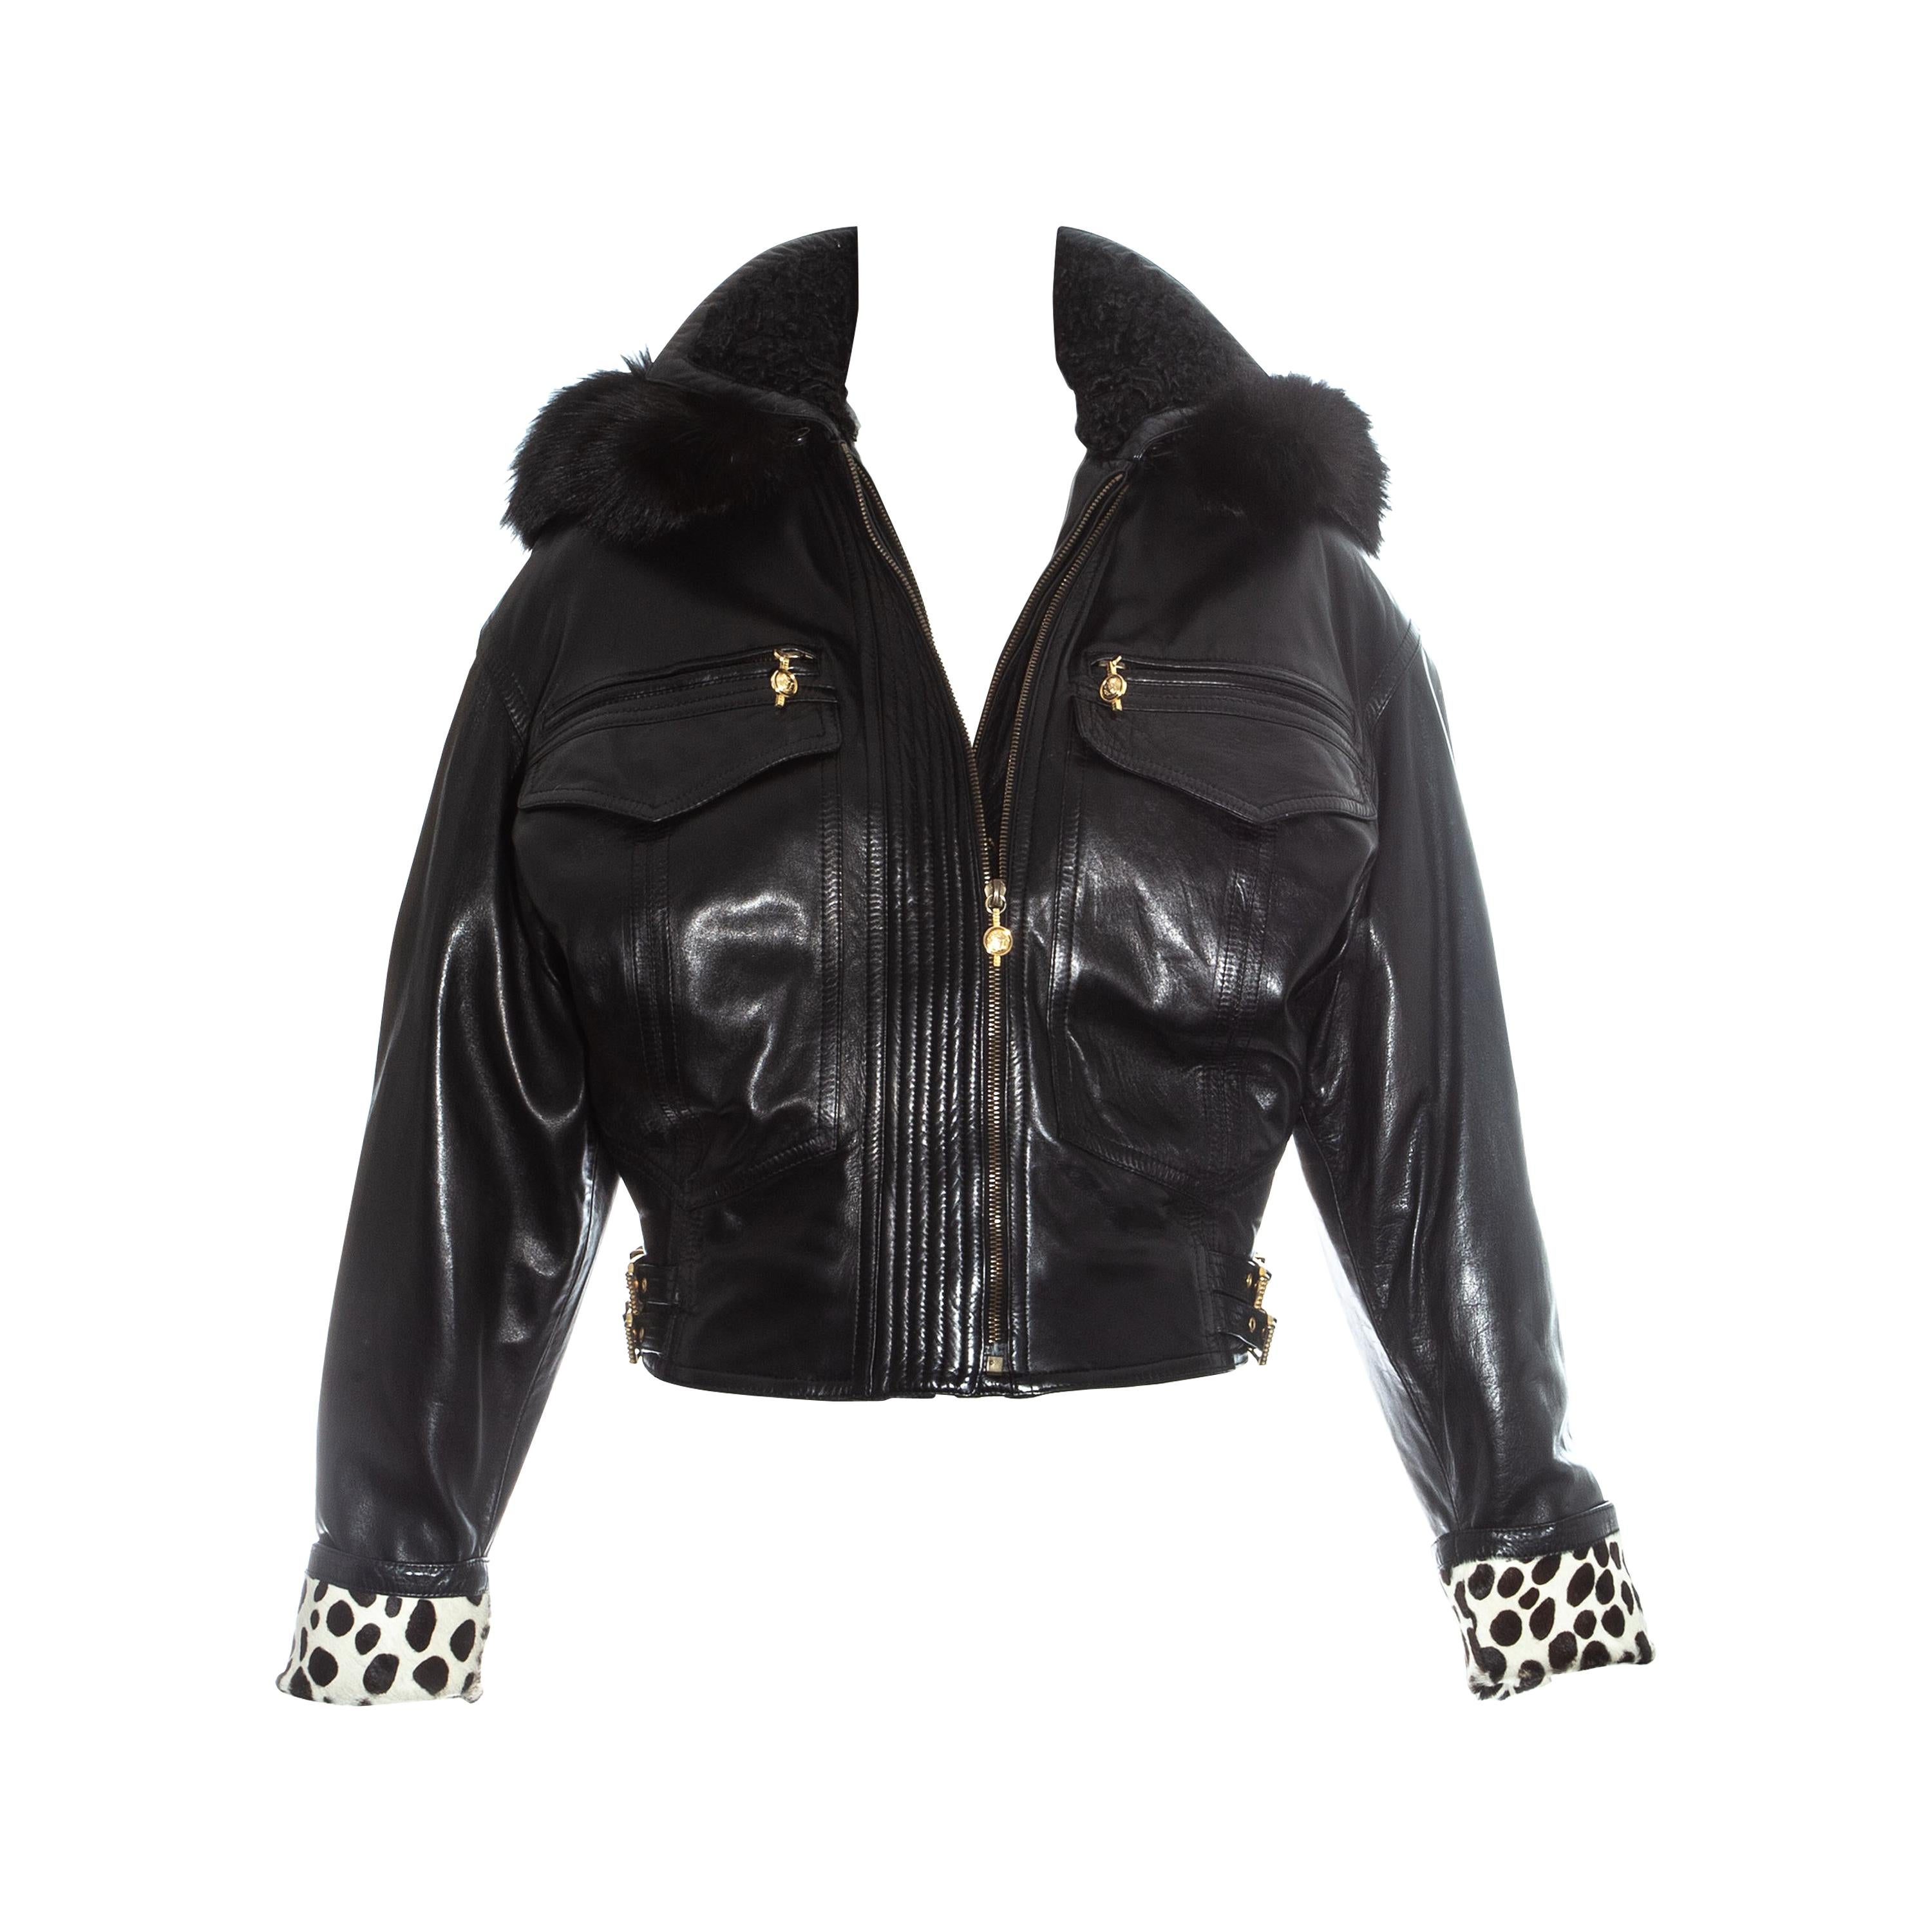 Gianni Versace black leather bomber jacket with bondage buckles, fw 1992 For Sale